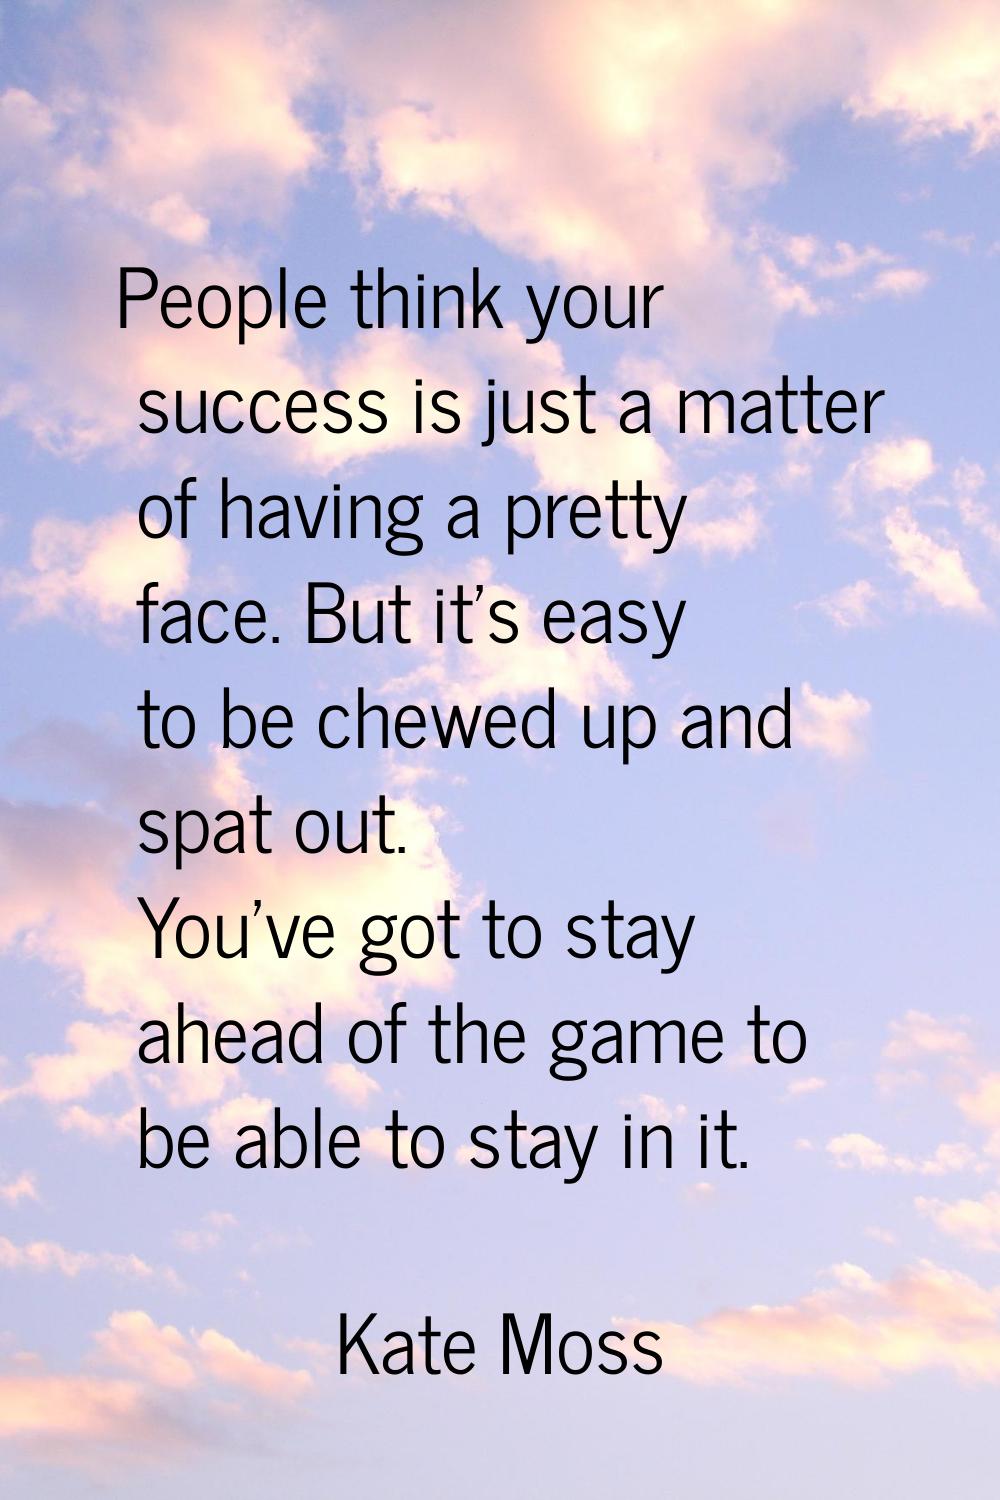 People think your success is just a matter of having a pretty face. But it's easy to be chewed up a